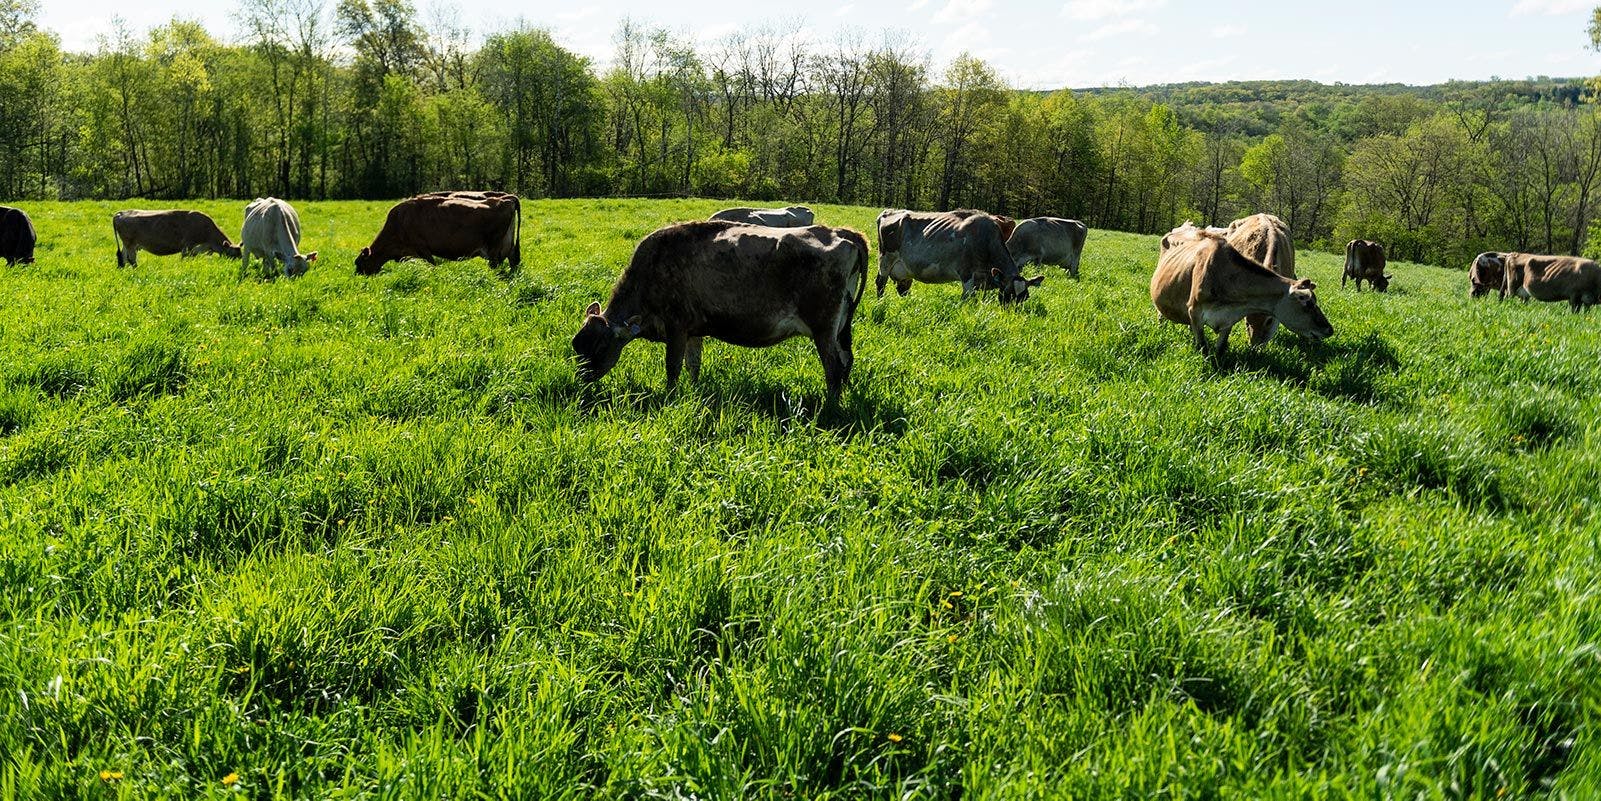 Cows graze freely in a green pasture on an organic farm in Iowa.